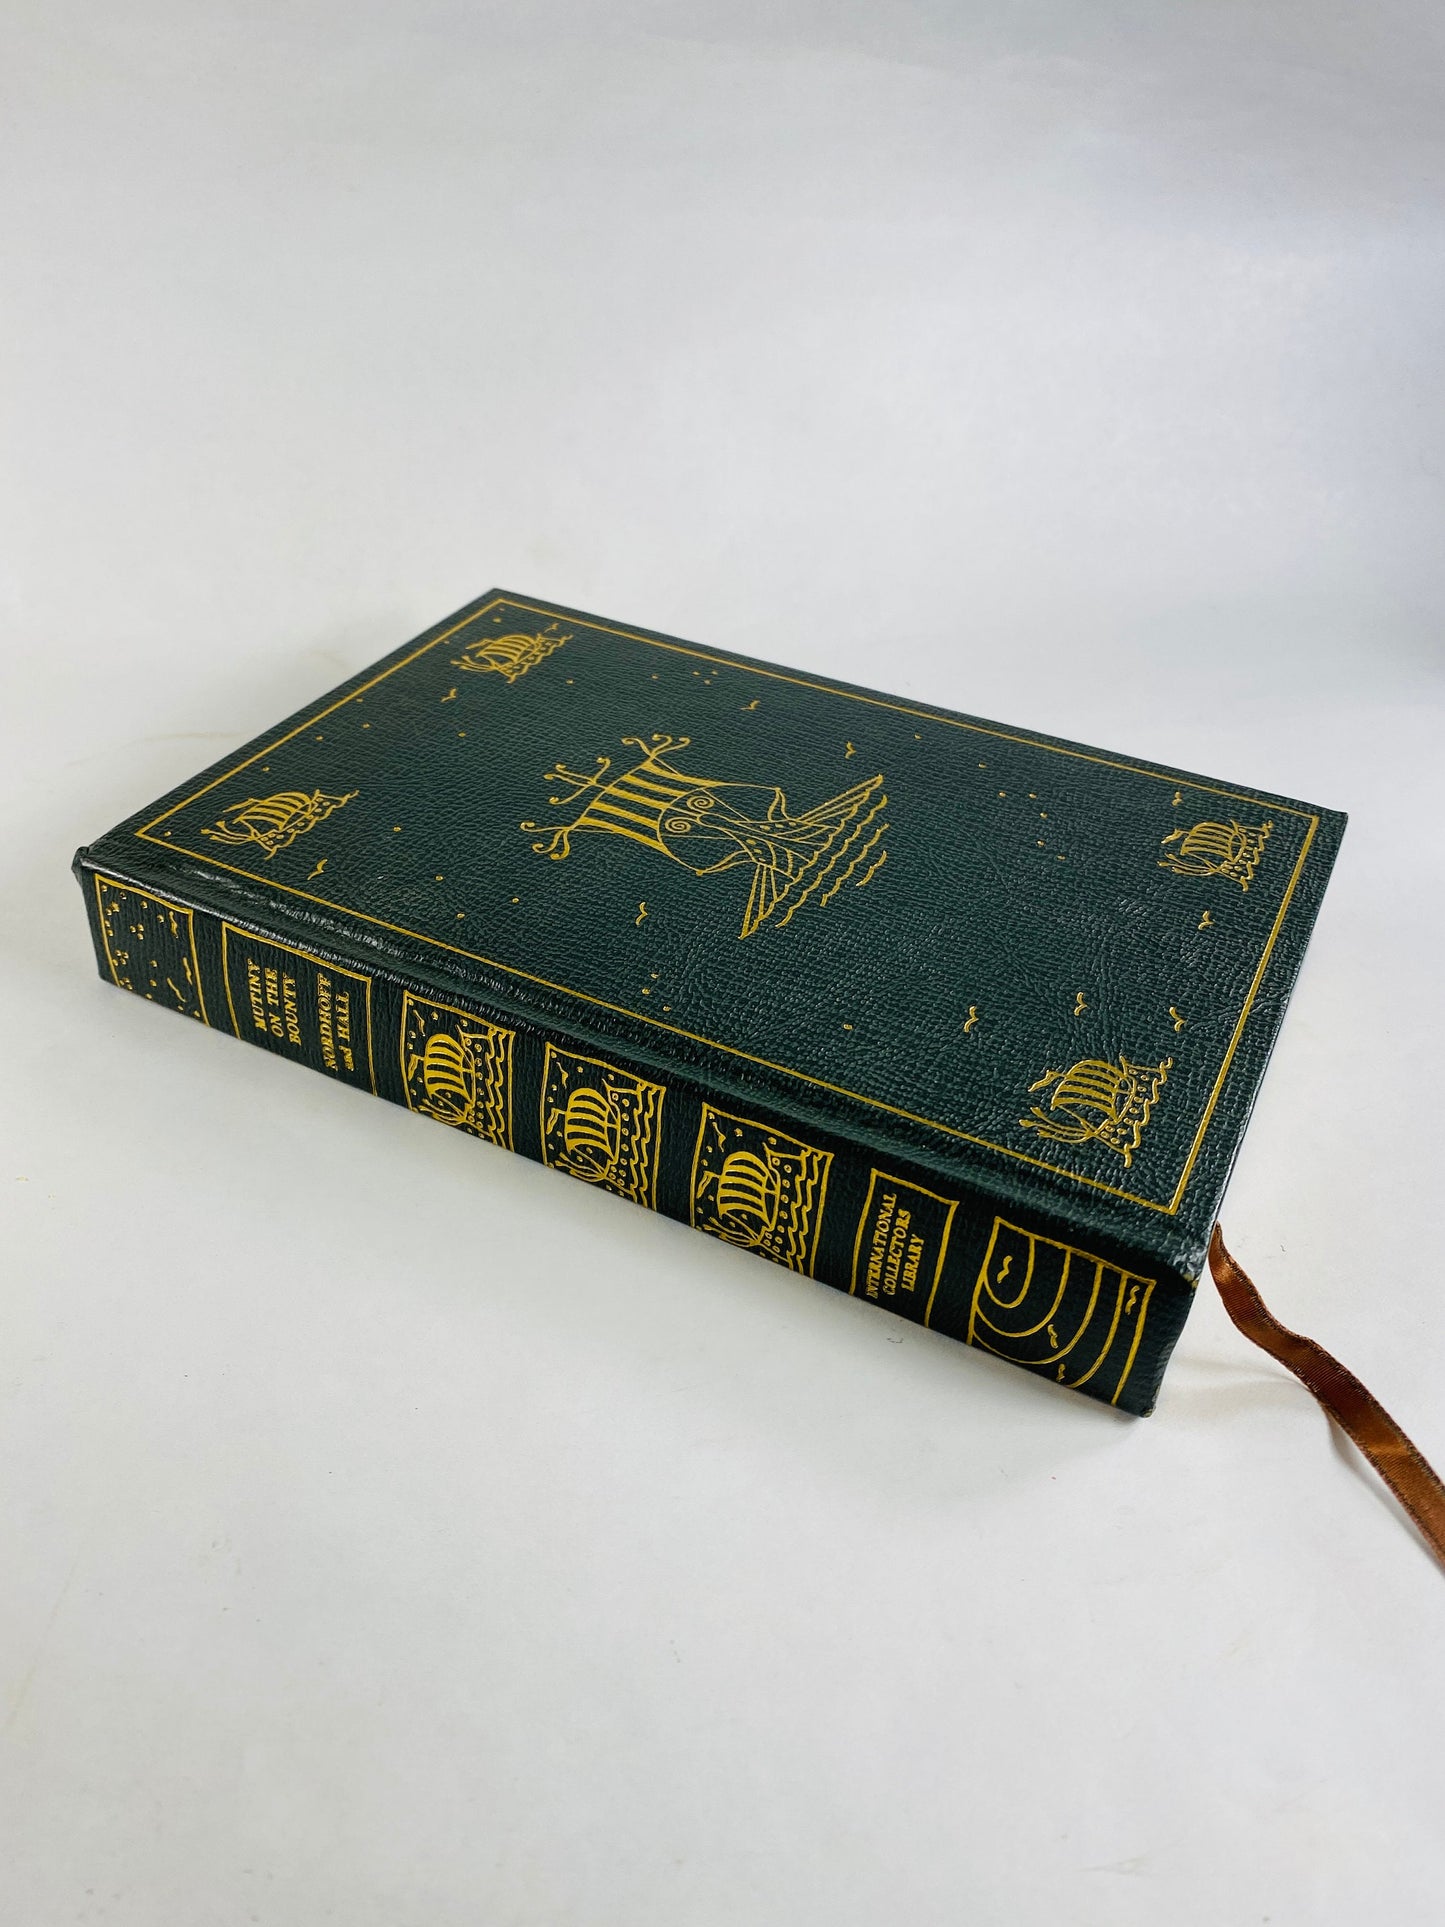 Mutiny on the Bounty vintage green leatherette book by Charles Nordhoff and James Norman Hall circa 1969. Father's Day gift bookshelf decor